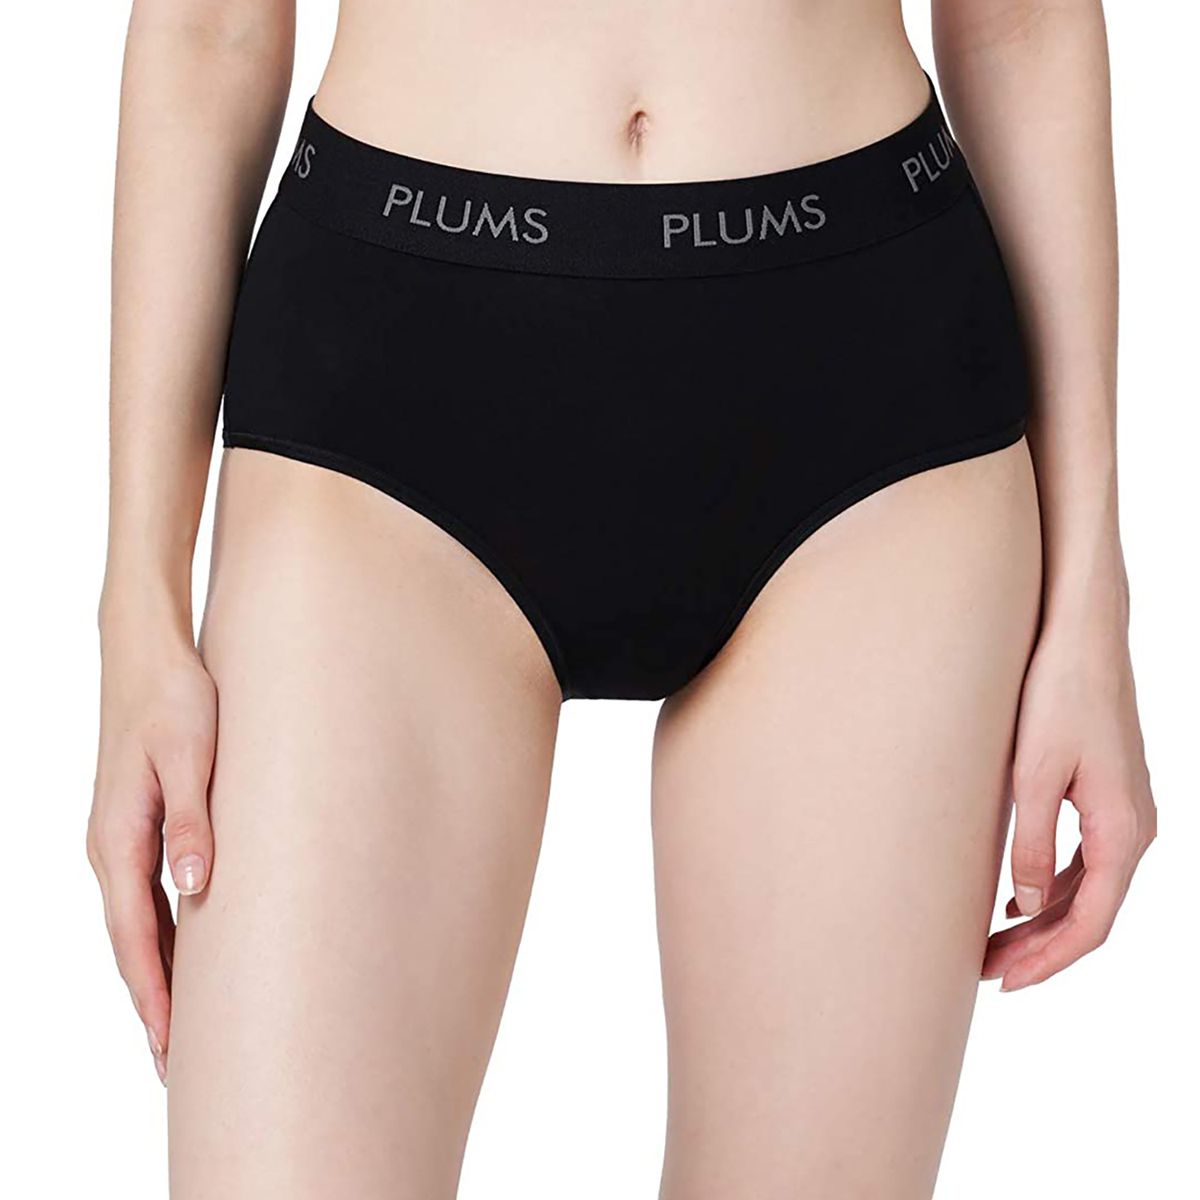 Plums hipster brief